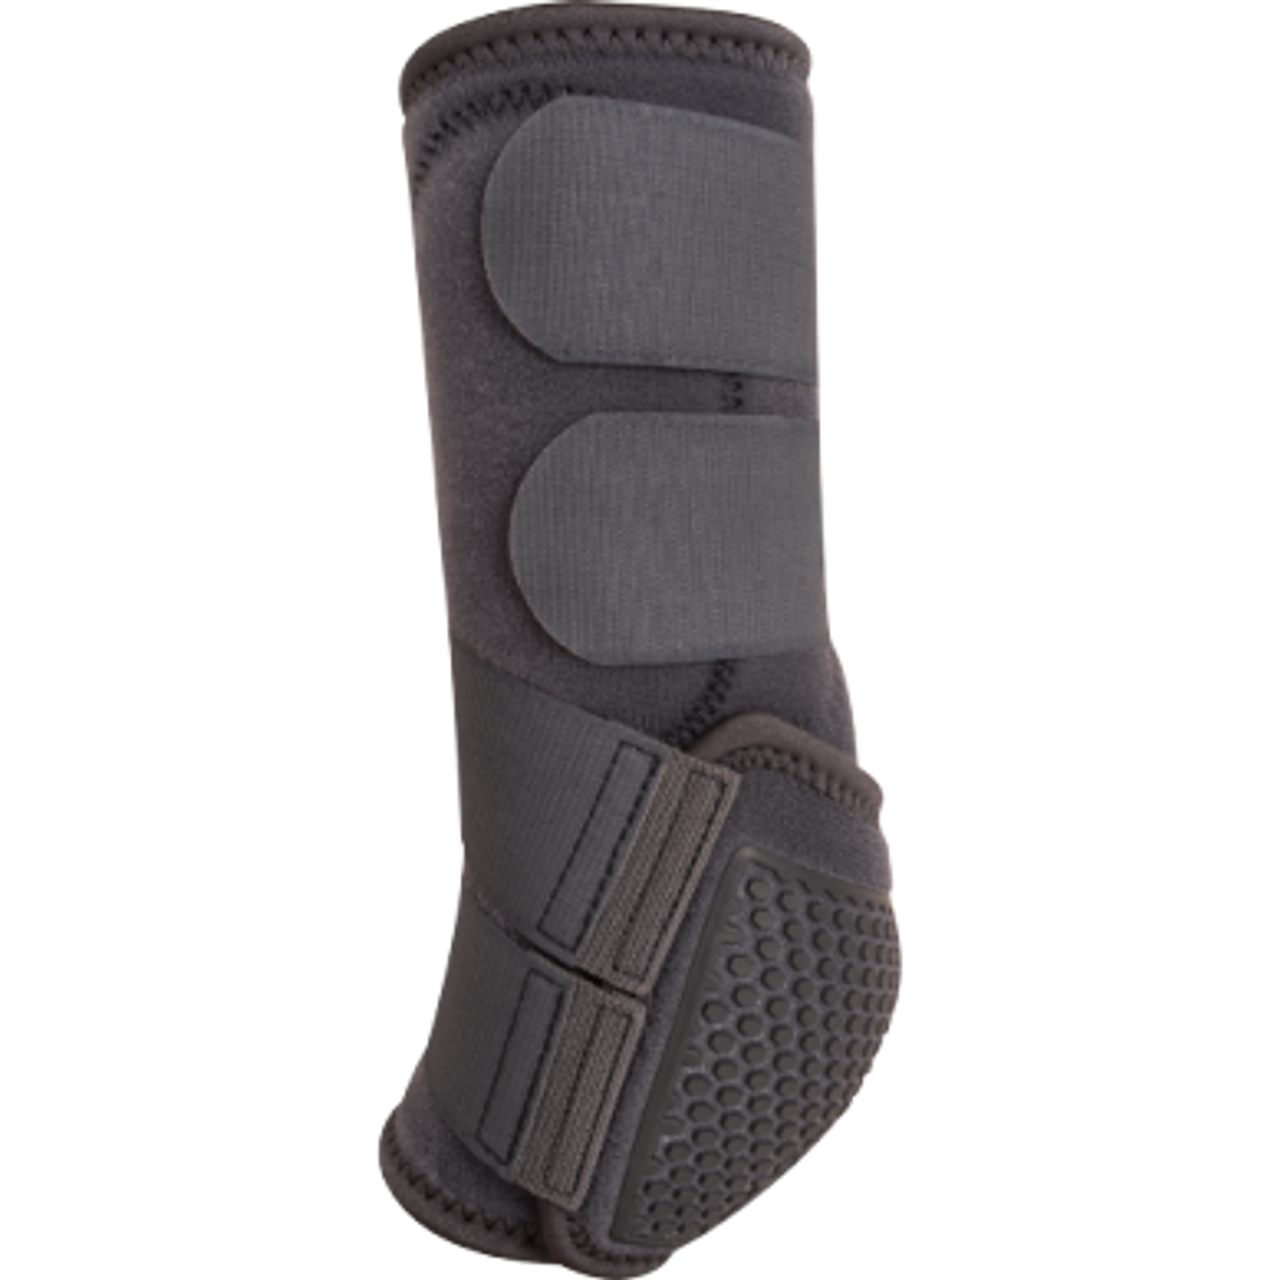 FCLS202CHR Classic Equine Flexion by Legacy2 Charcoal Hind Support Boots